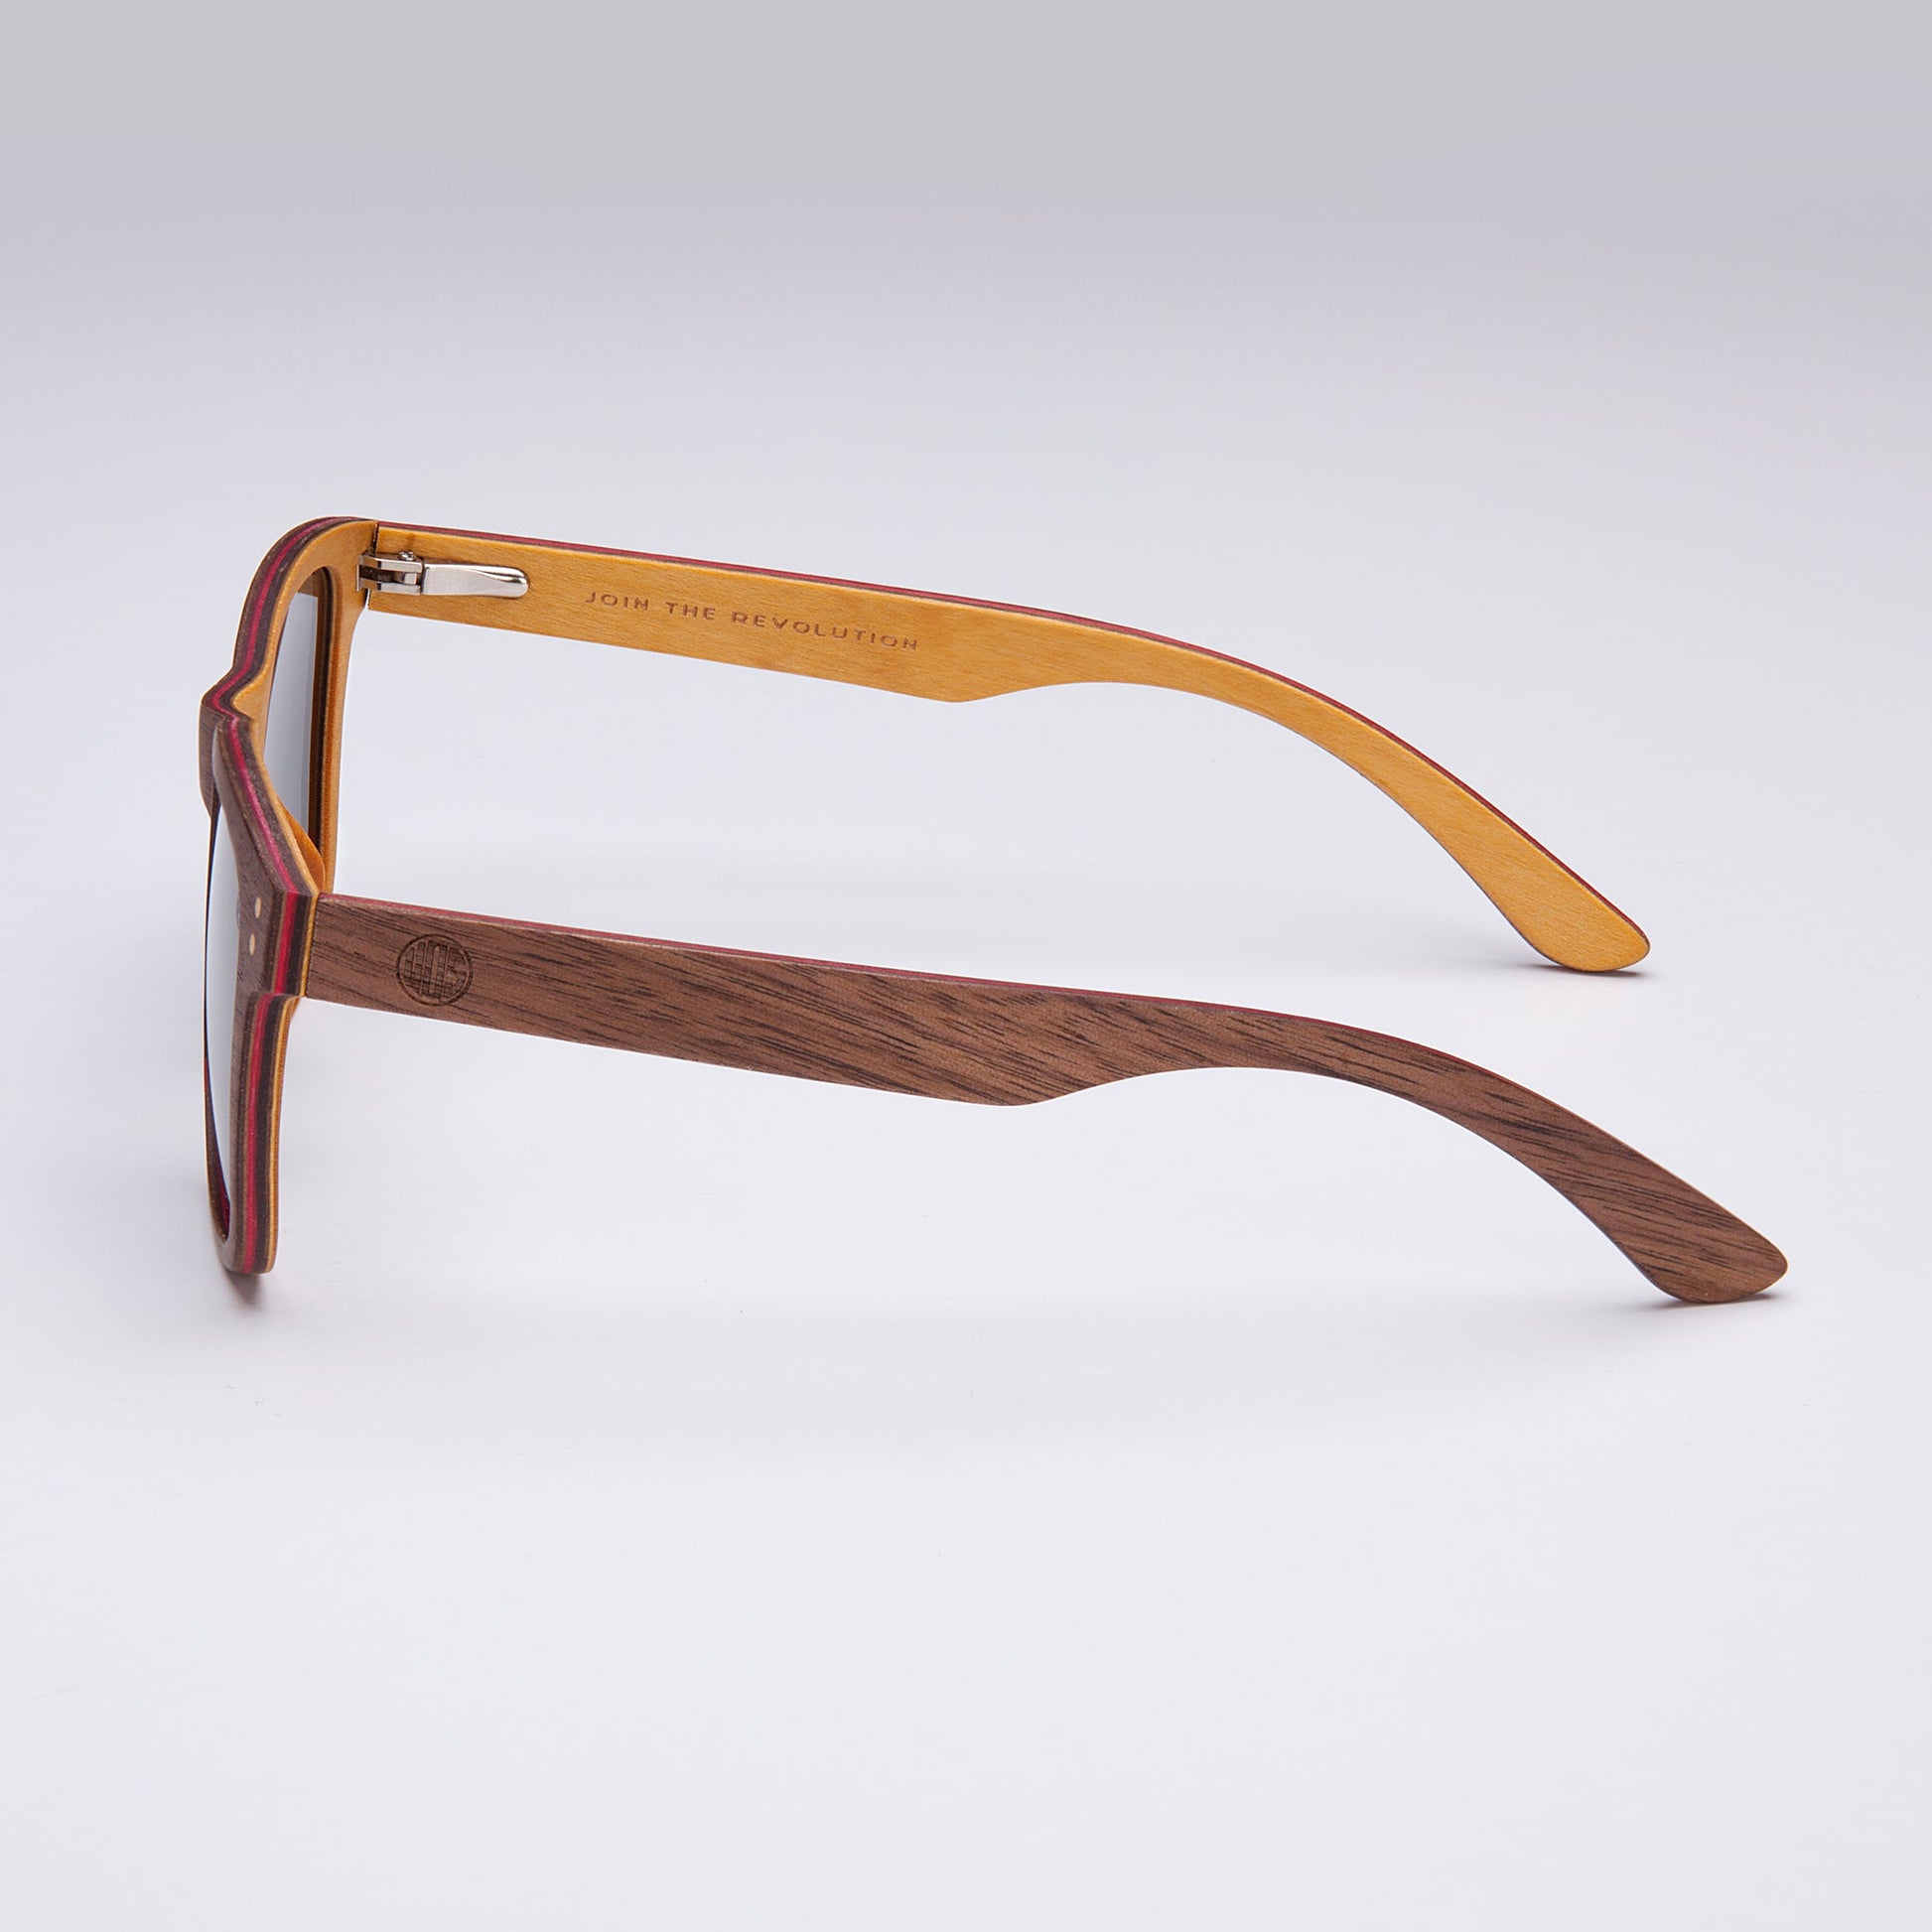 Wooden Sunglasses are Eco Friendly. Silver Mirror LensThe Fistral- Silver Mirror Lens offers a unique twist to any look. The silver mirror finish to these sunglasses helps you stand out. This accessory is perfect for an